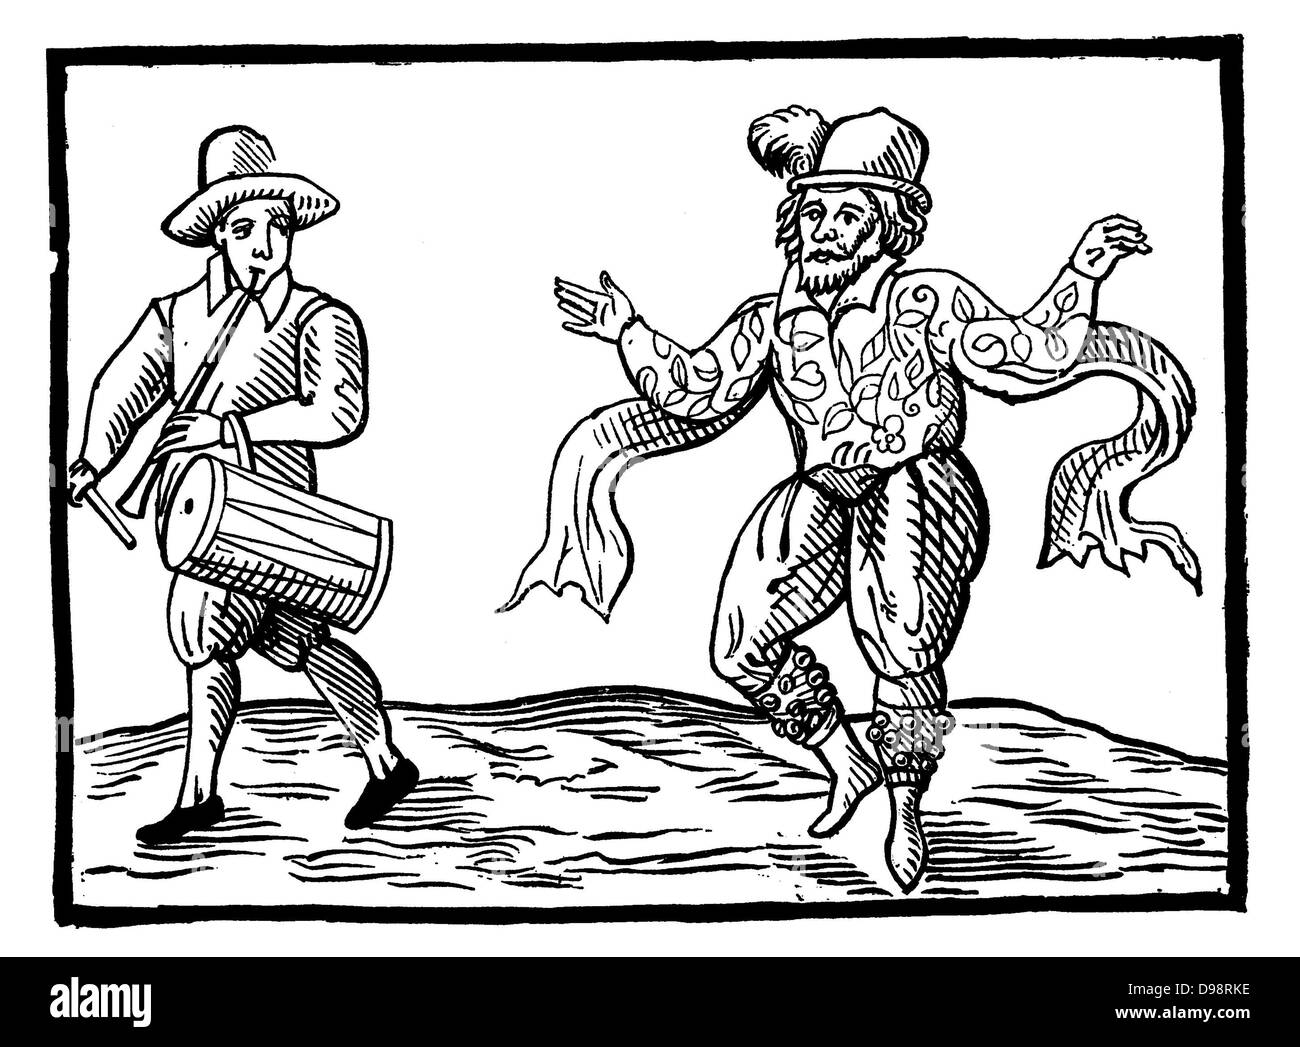 English Elizabethan clown Will Kempe dancing a jig from Norwich to London in 1600. William Kempe (also spelled Kemp) (fl. 1600{d.1603?}) was an English actor and dancer best known for being one of the original actors in William Shakespeare's plays. Specialising in comic roles, he was considered during the period as the successor to the great Queen's Men clown Richard Tarlton.  Source: Kempes Nine Daies Wonder Date 160 Stock Photo